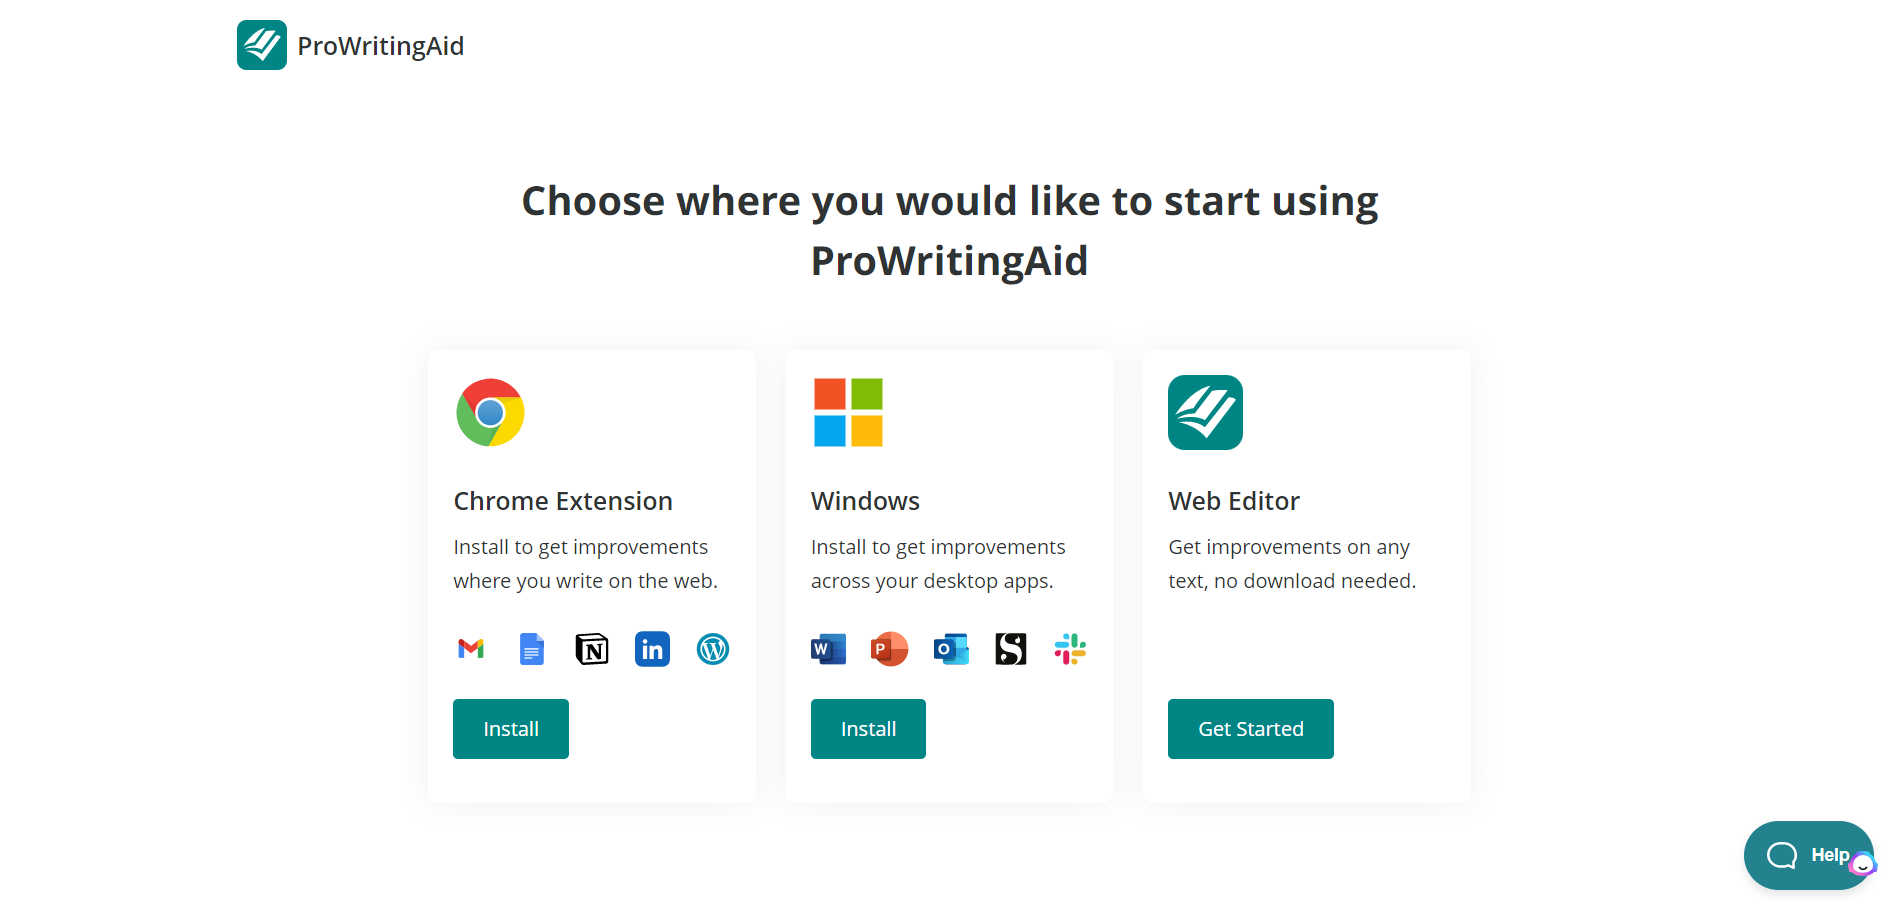 Choose where you will use Pro Writing Aid